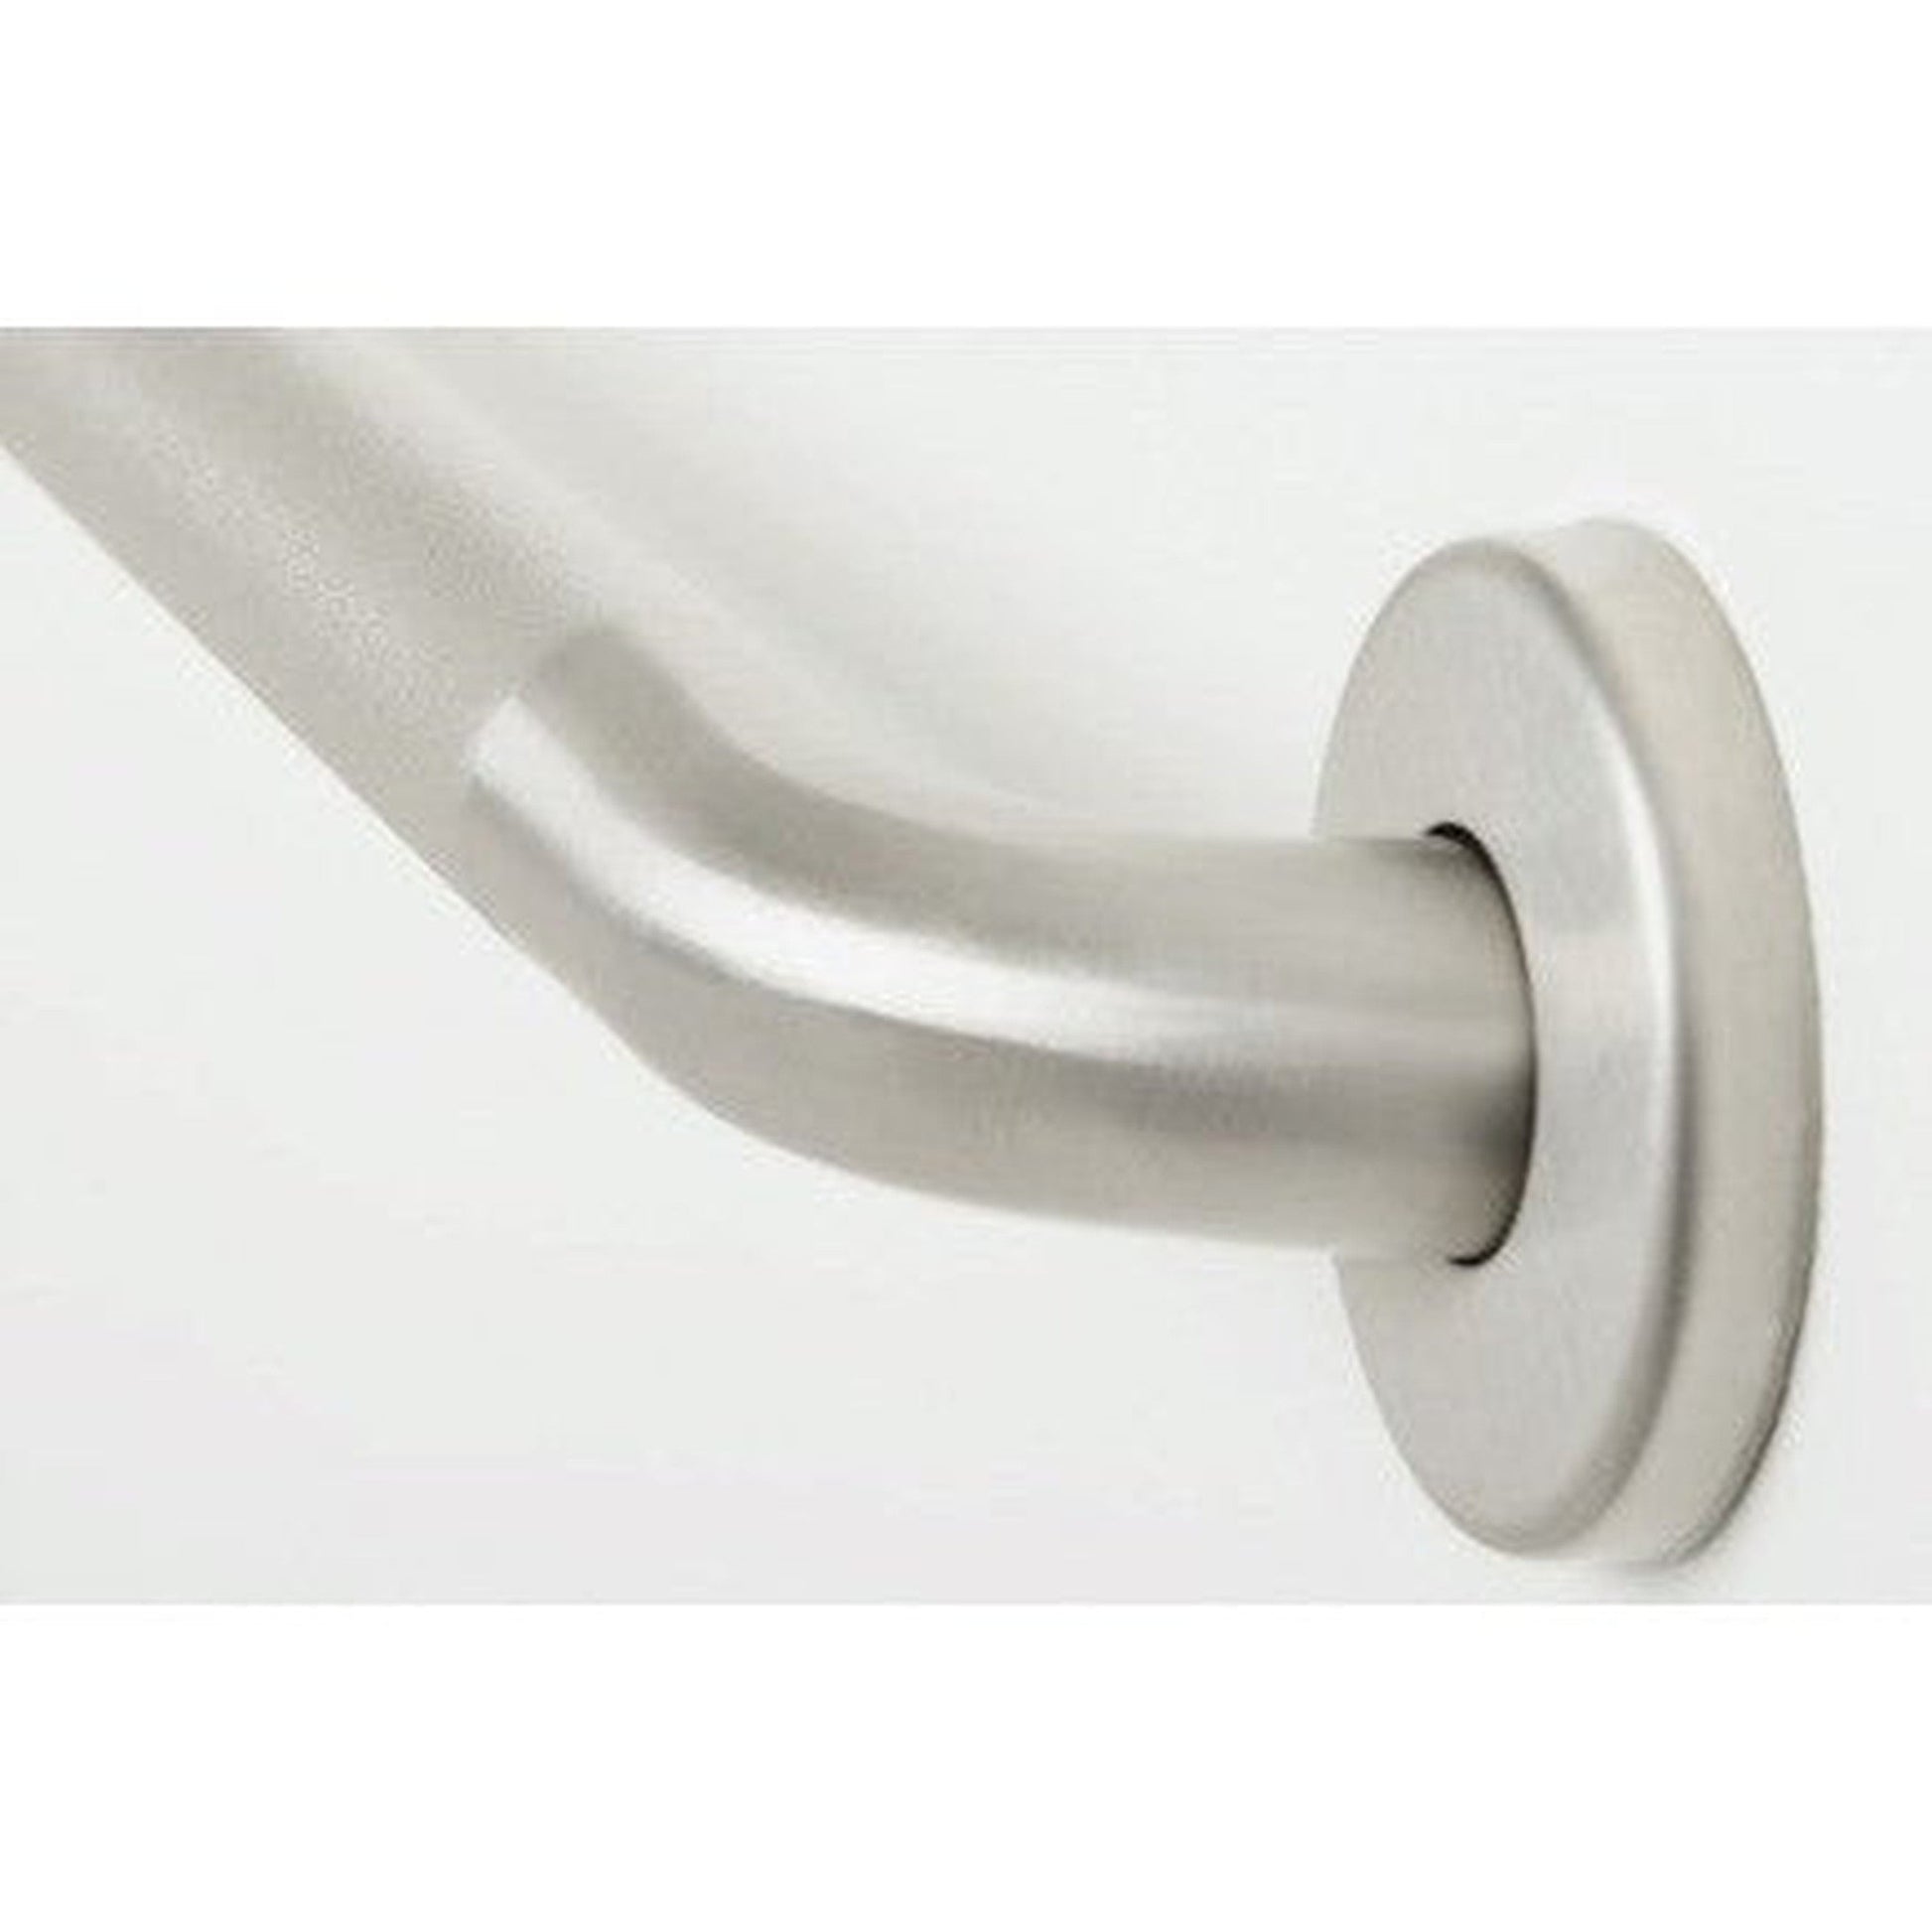 Seachrome Signature GY Series 36" Peened With Satin Stainless Steel Ends 1.25" Tube Diameter Straight Grab Bar